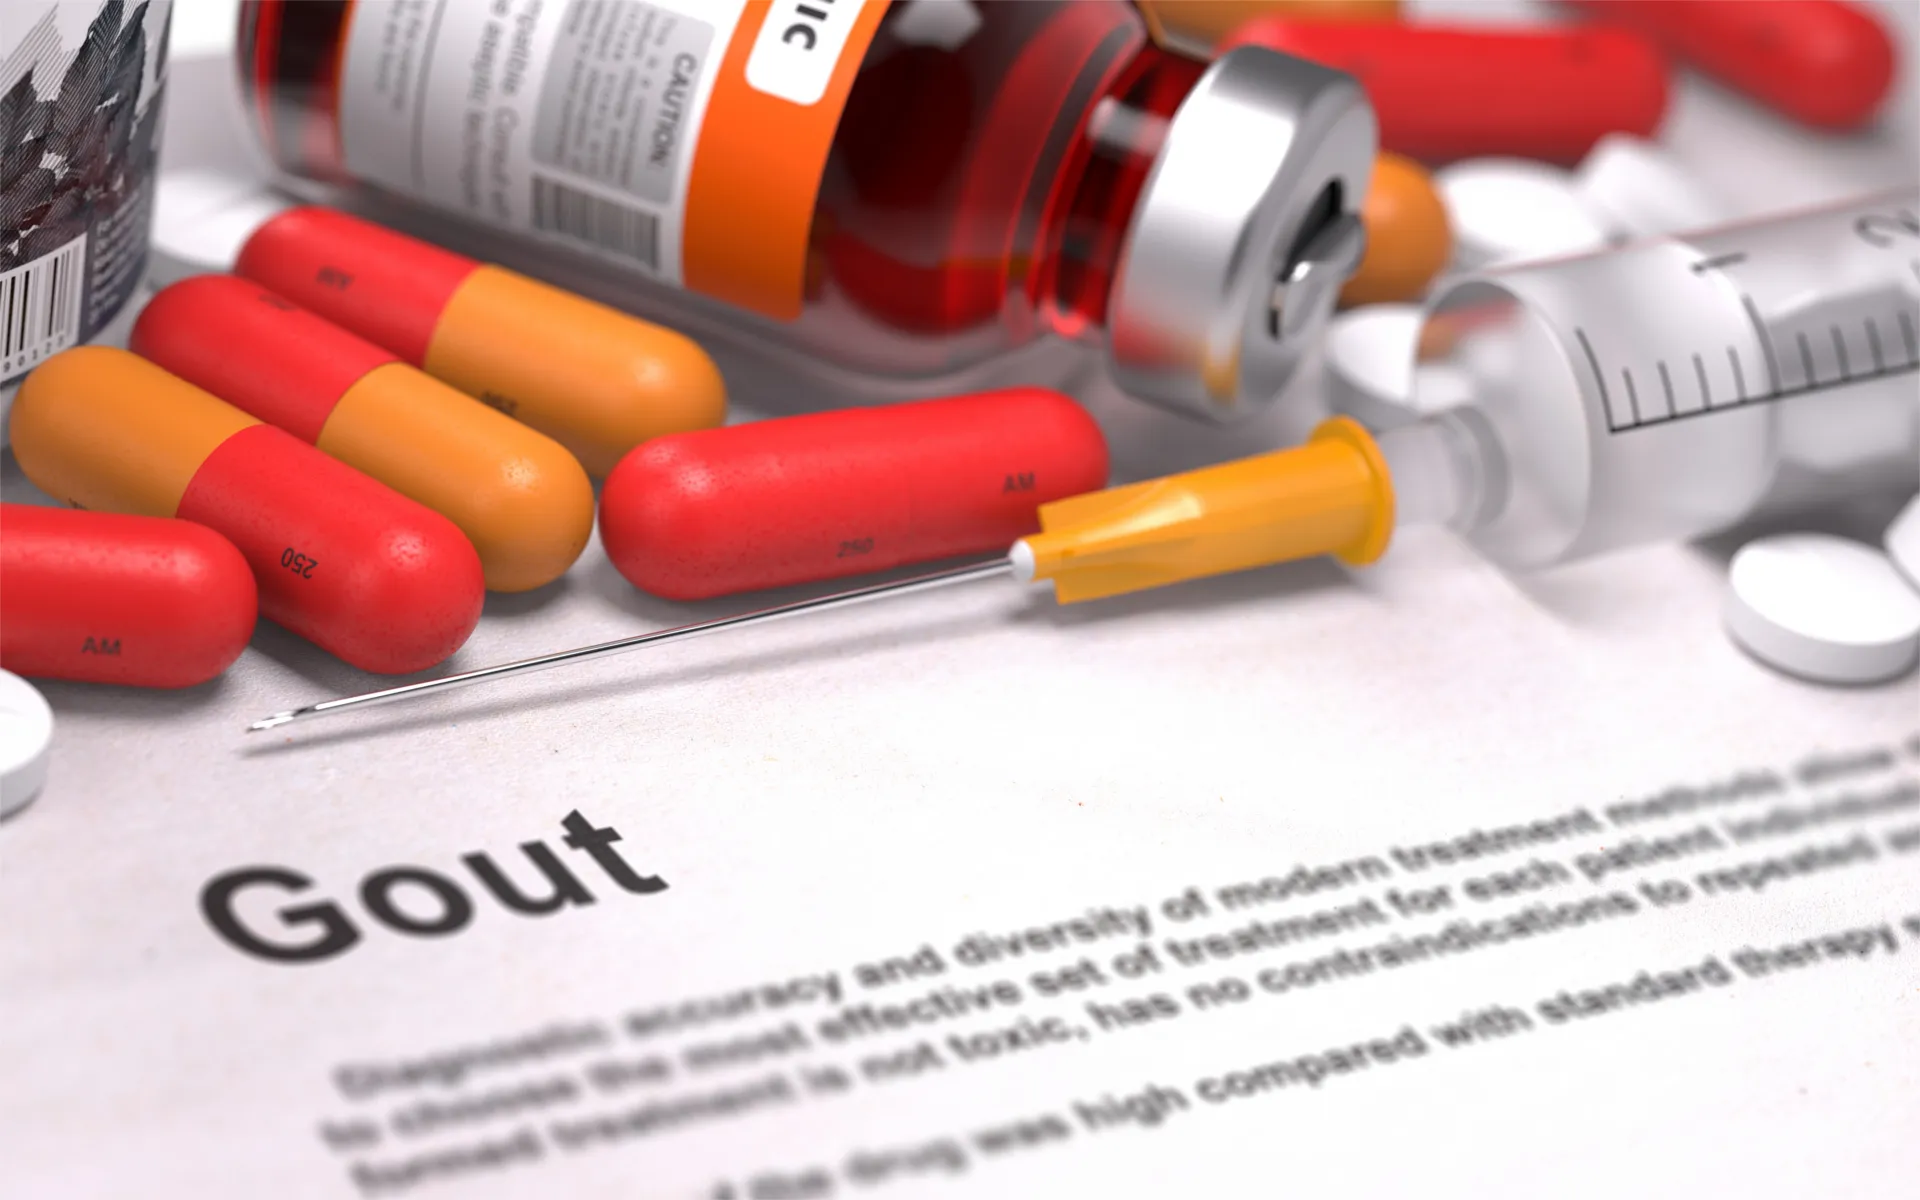 Quick Facts on Gout